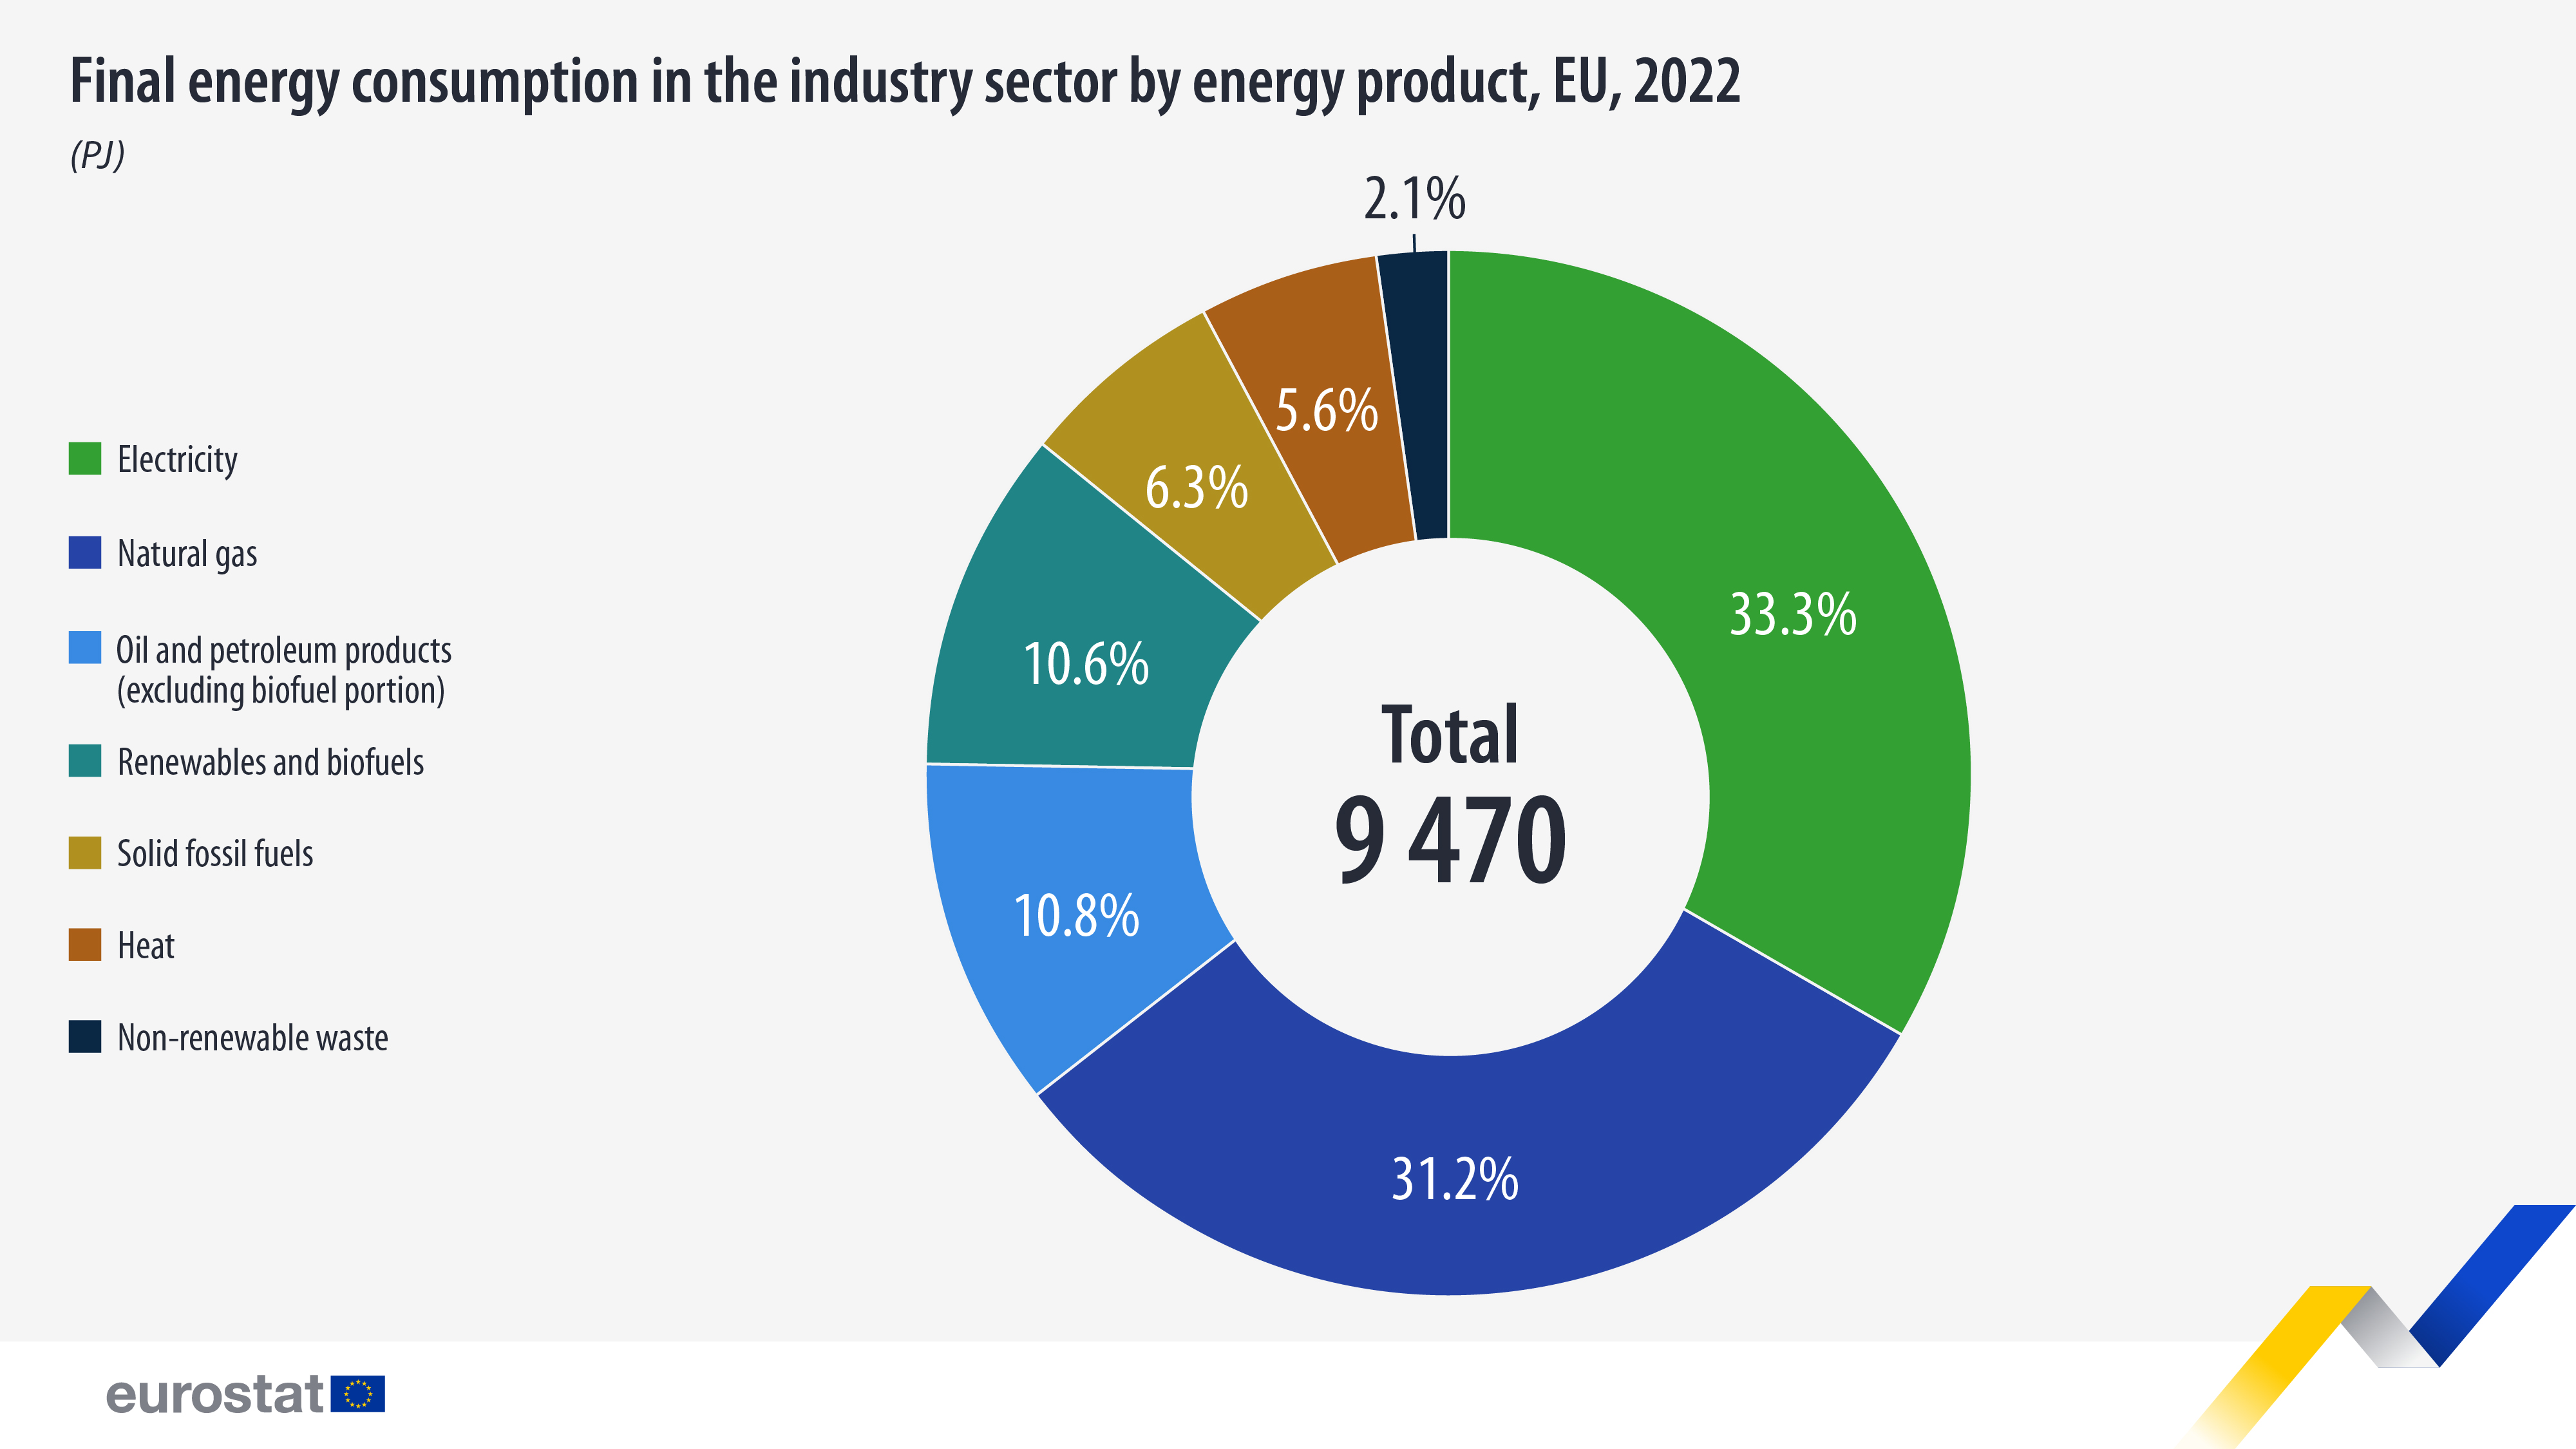 final energy consumption in the industry sector by energy product EU 2022